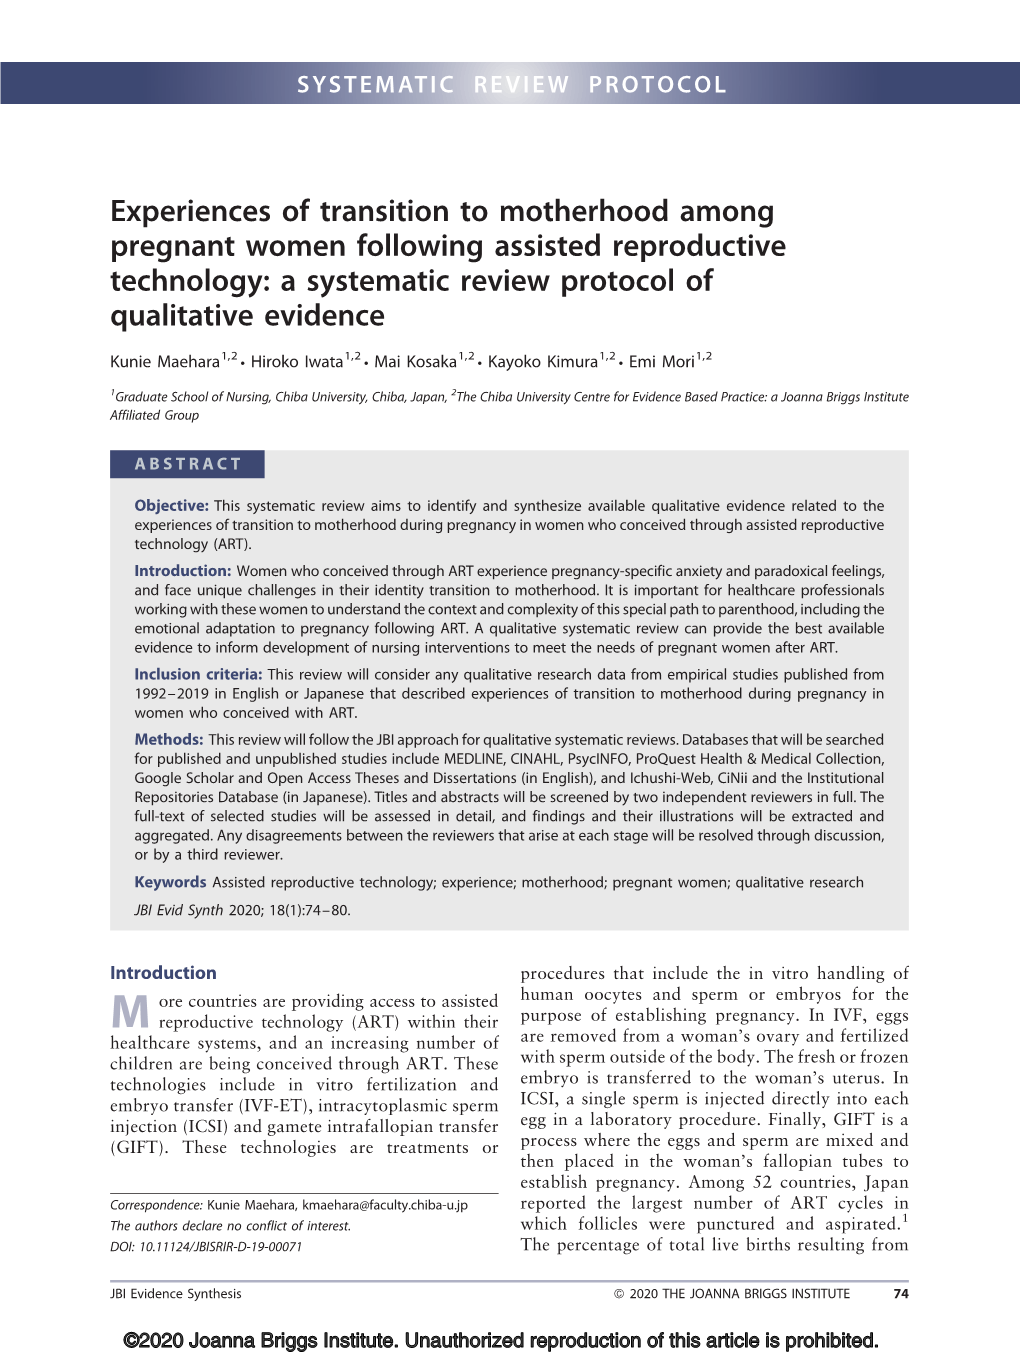 Experiences of Transition to Motherhood Among Pregnant Women Following Assisted Reproductive Technology: a Systematic Review Protocol of Qualitative Evidence